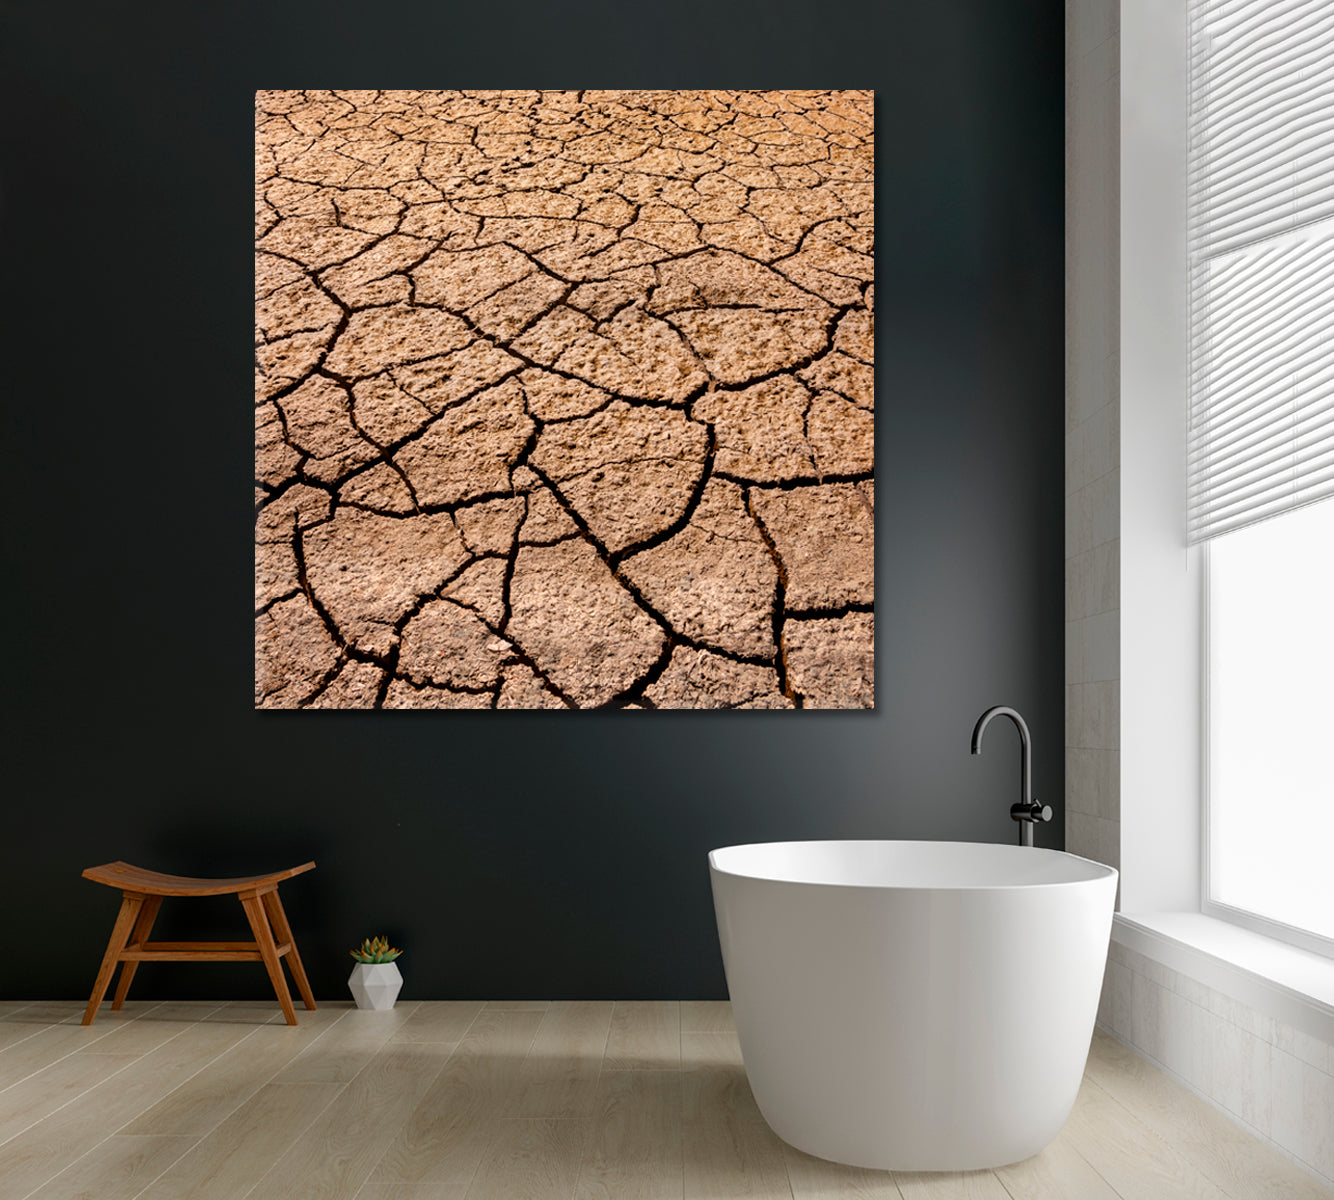 Cracked Earth in Etosha National Park Namibia Africa Canvas Print ArtLexy 1 Panel 12"x12" inches 